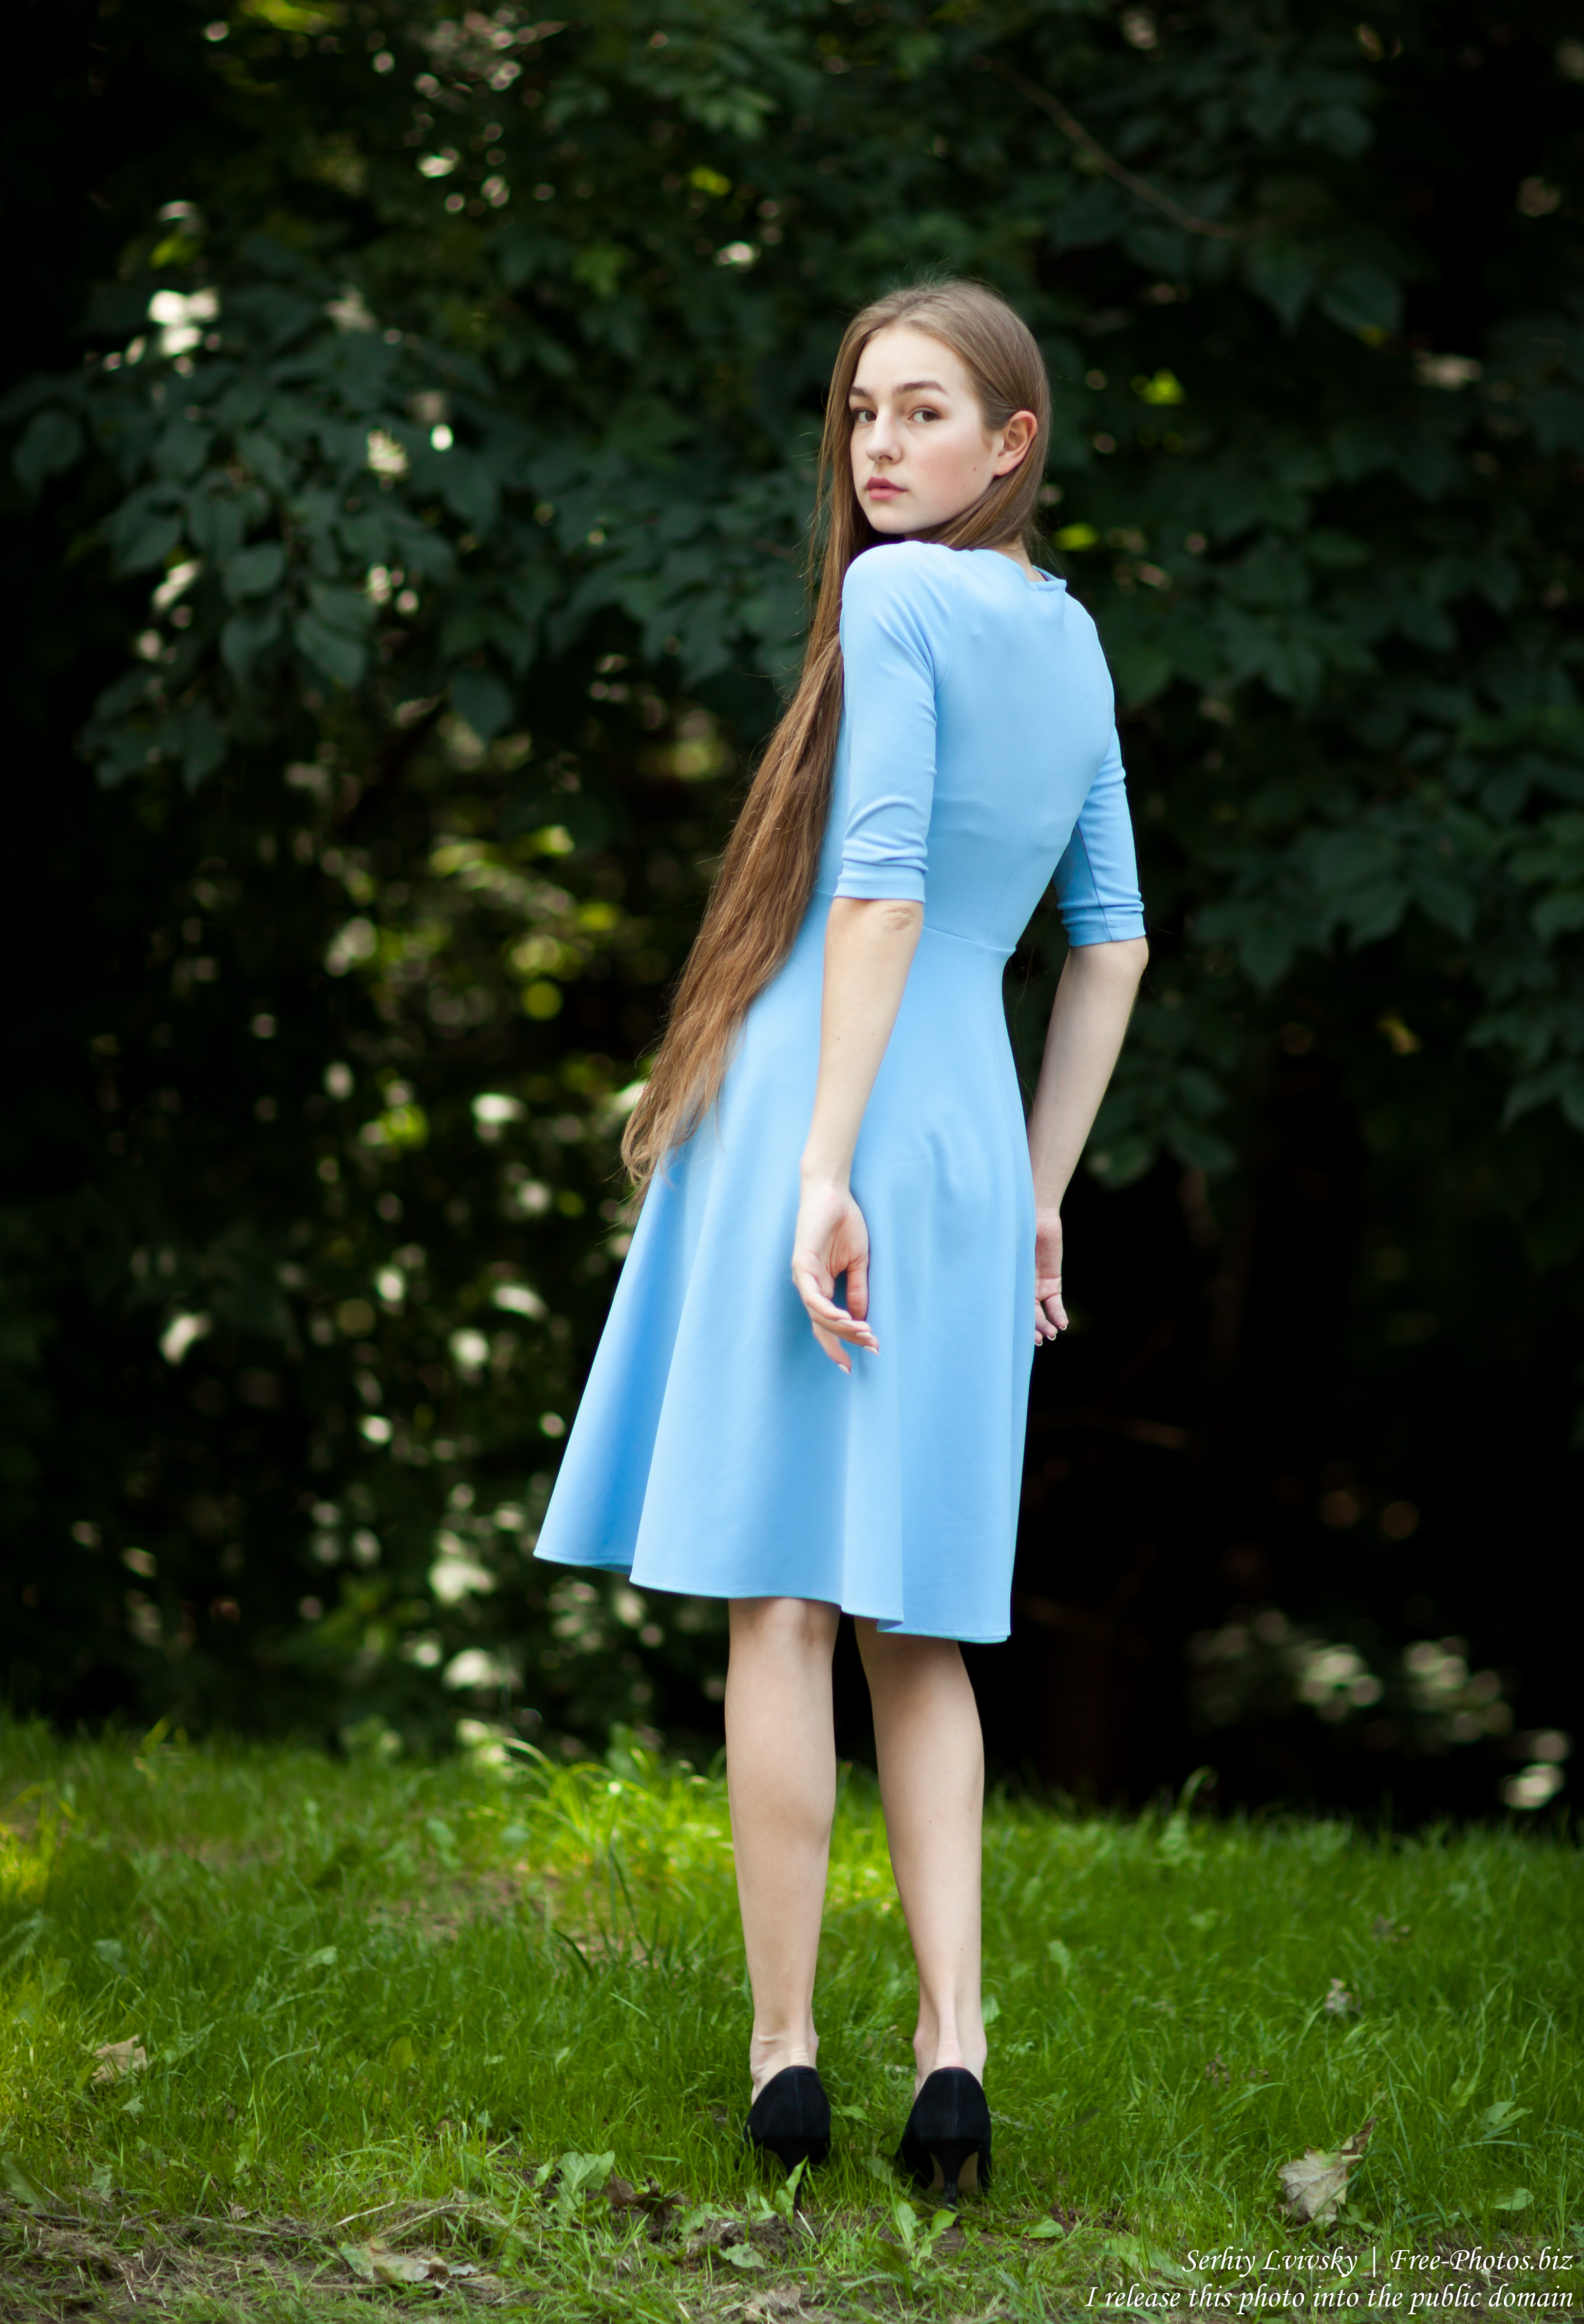 Justyna - a 16-year-old fair-haired girl photographed in June 2018 by Serhiy Lvivsky, picture 15